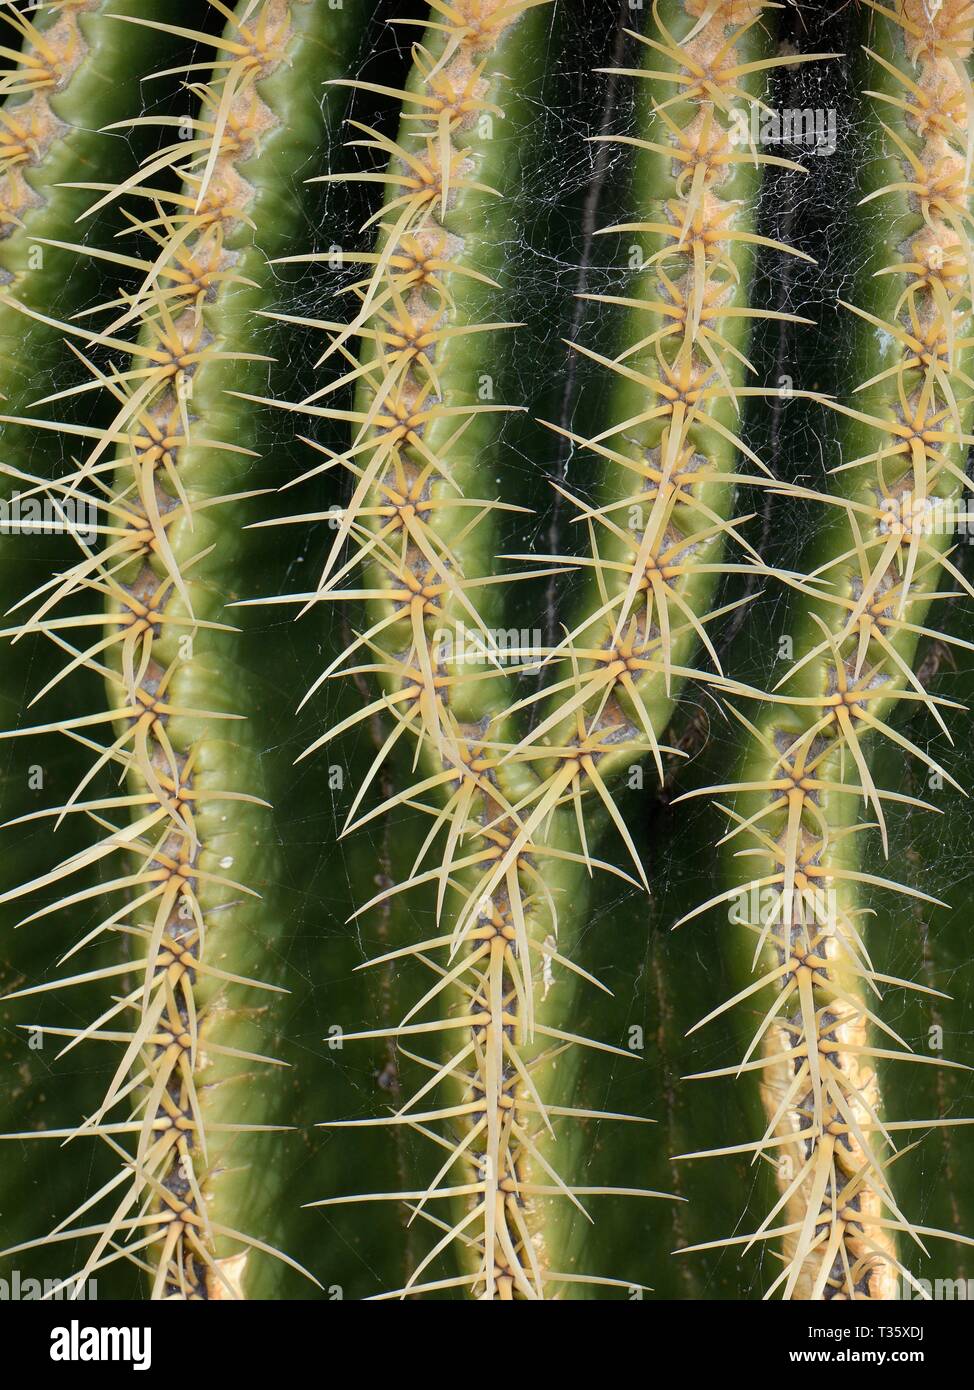 Rows of spines on a Golden Barrel Cactus / Golden Ball / Mother-in-Law's Cushion (Echinocactus grusonii), a species endemic to Mexico, Lanzarote. Stock Photo